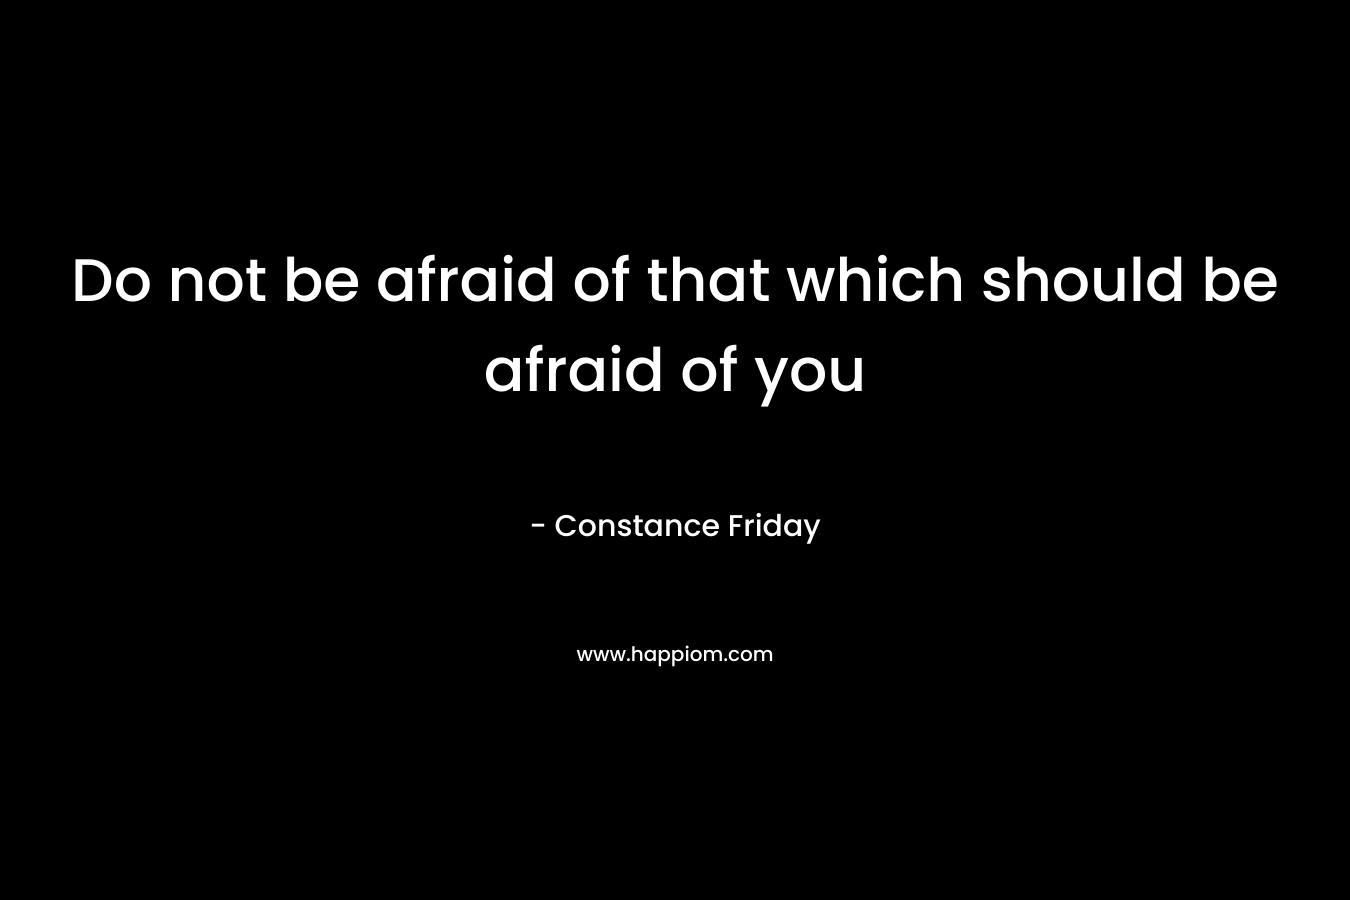 Do not be afraid of that which should be afraid of you